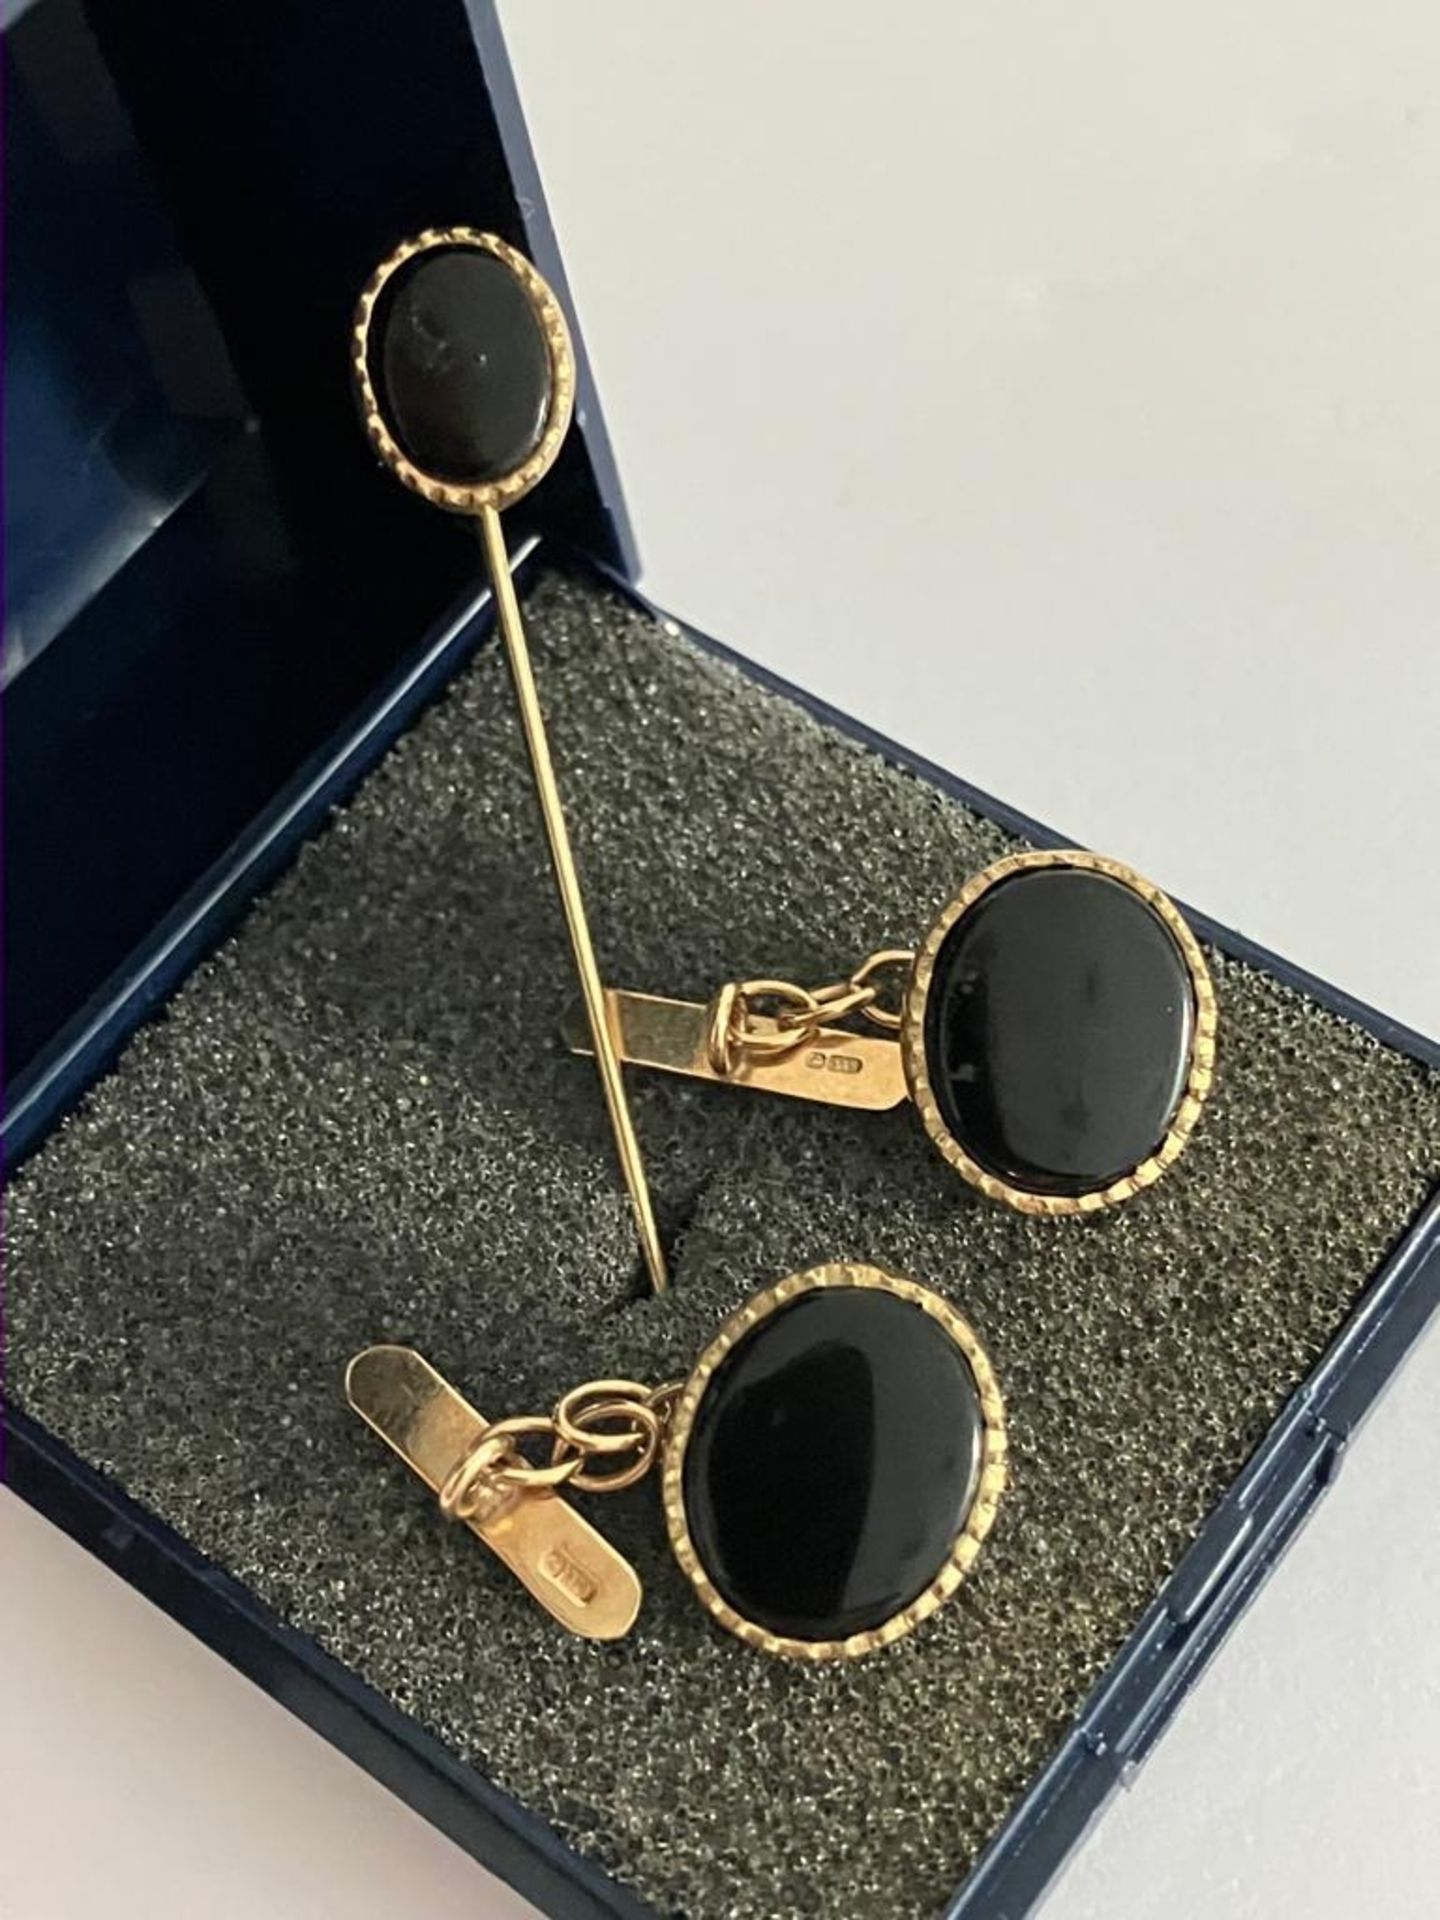 Pair of chain link 9 carat GOLD and BLACK ONYX CUFFLINKS together with matching 9 carat GOLD TIE